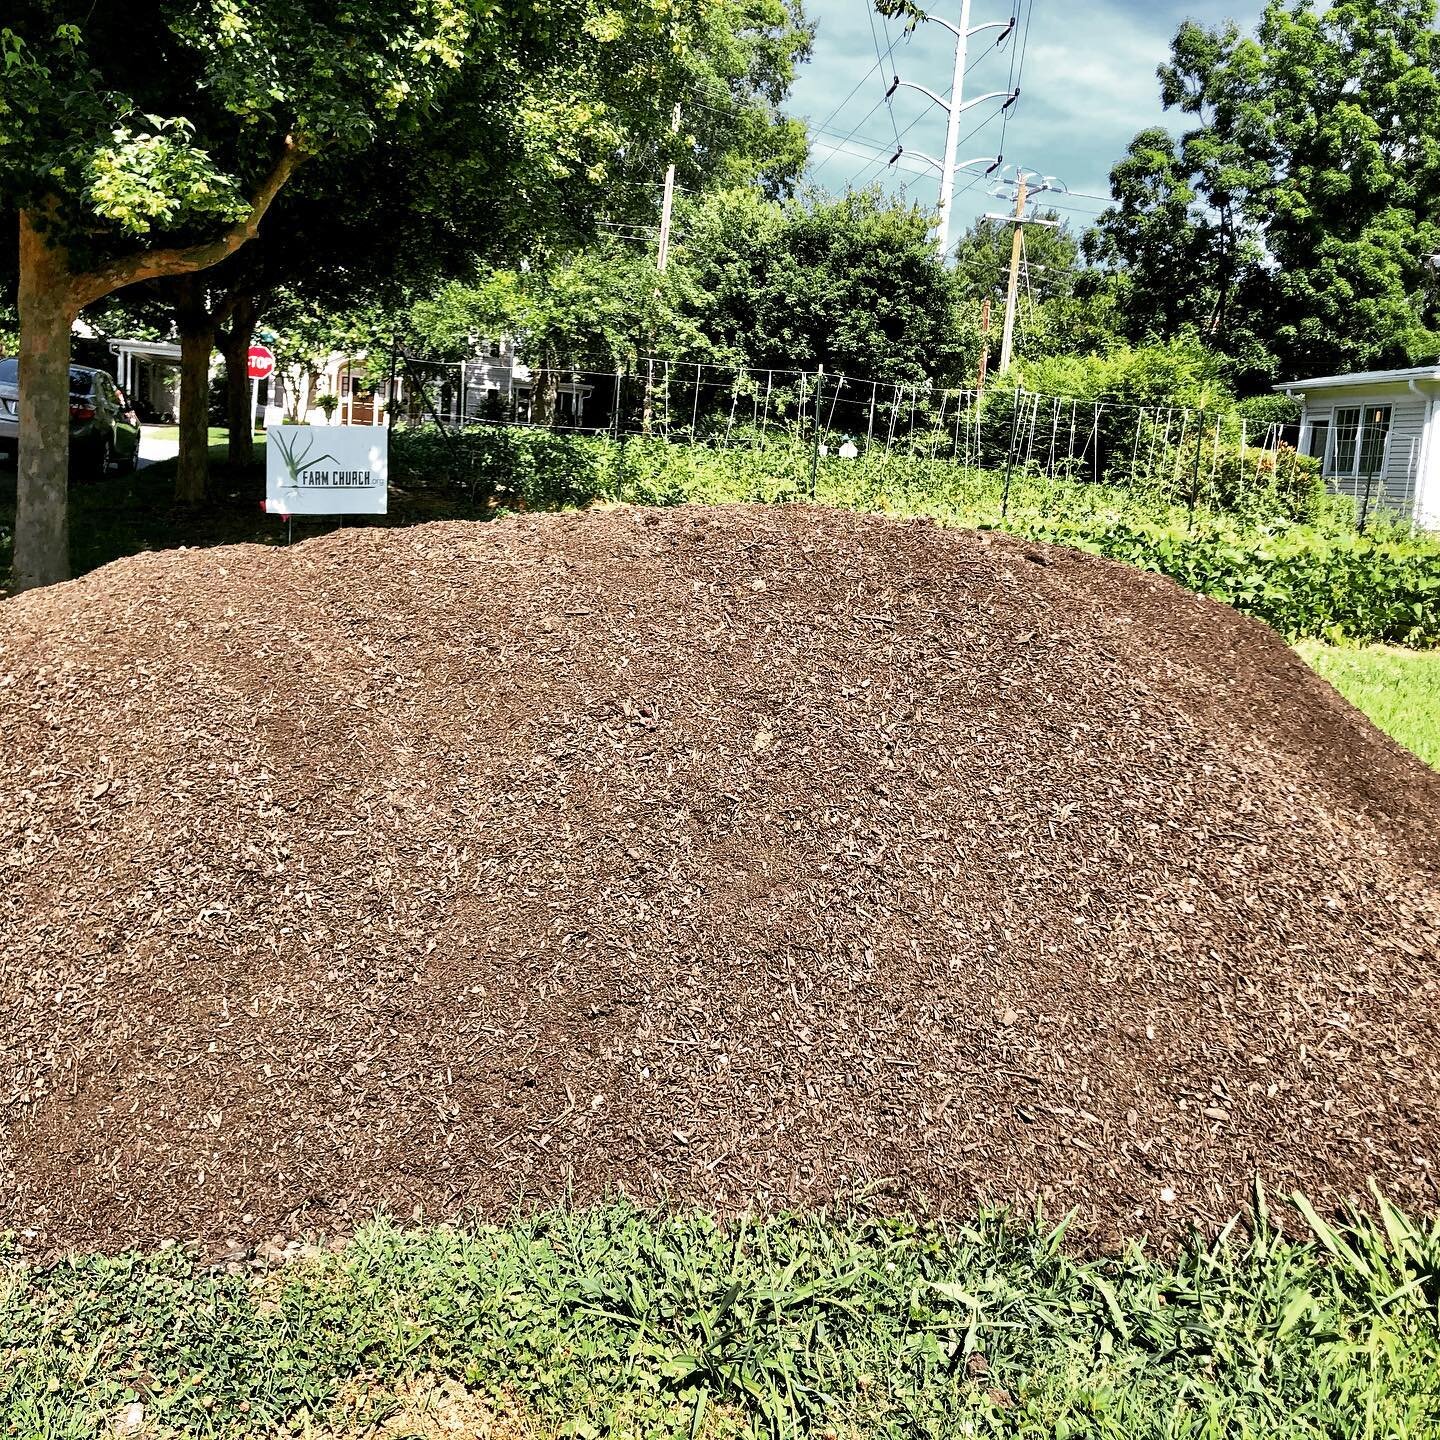 Grateful to @compostnow and many, many donors that have provided this rich and life-giving compost! #farmchurch #farm #church #durham #compost #compostnow #garden #foodsecurity